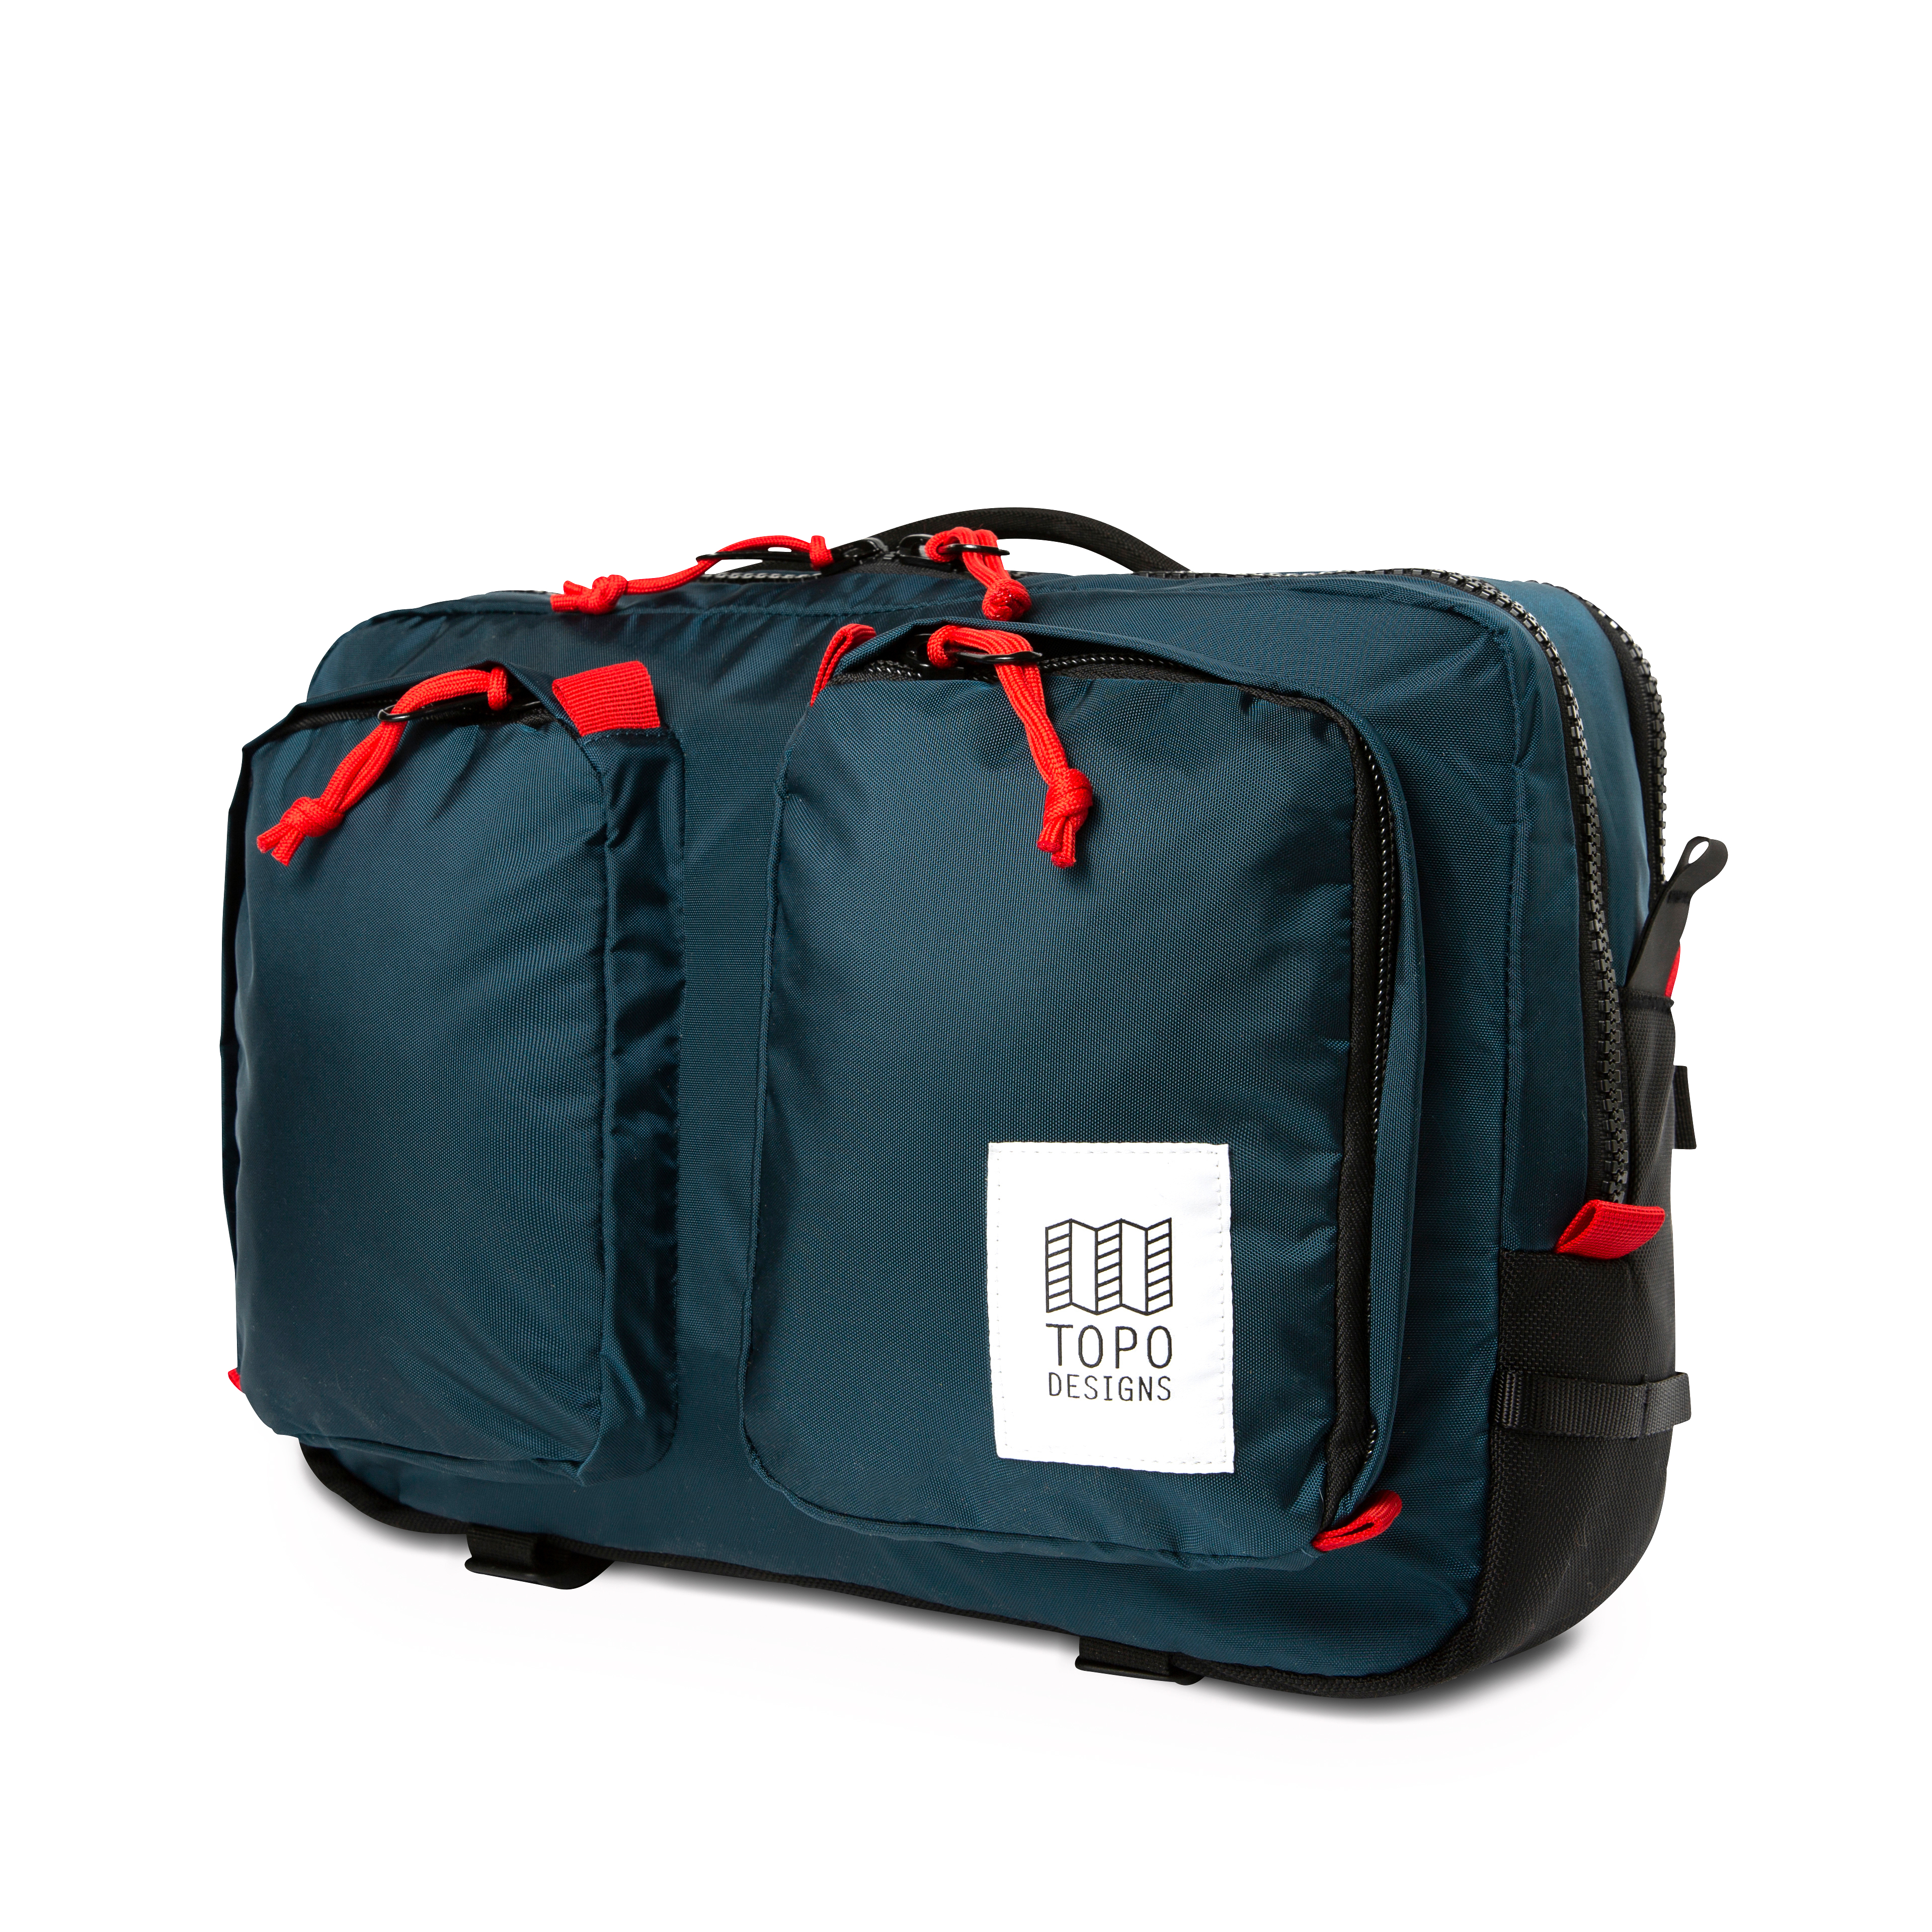 Topo Designs Global Briefcase - Navy | Messenger & Tote Bags